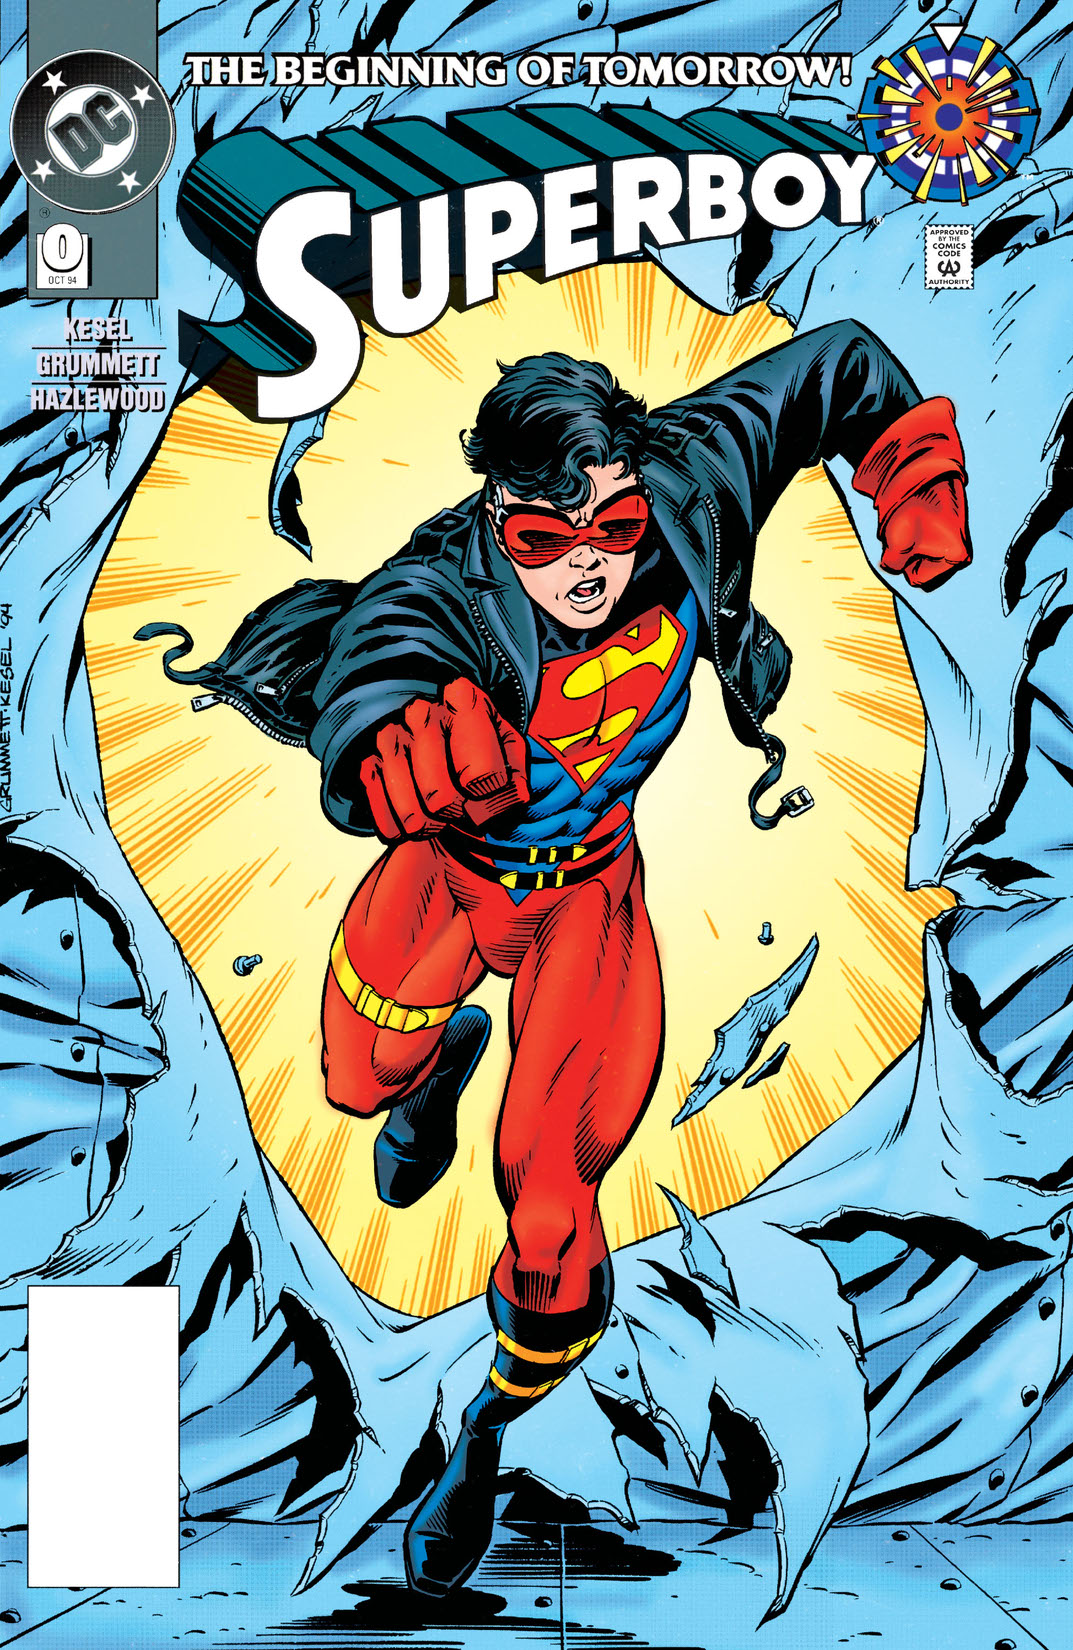 Superboy (1993-2002) #0 preview images